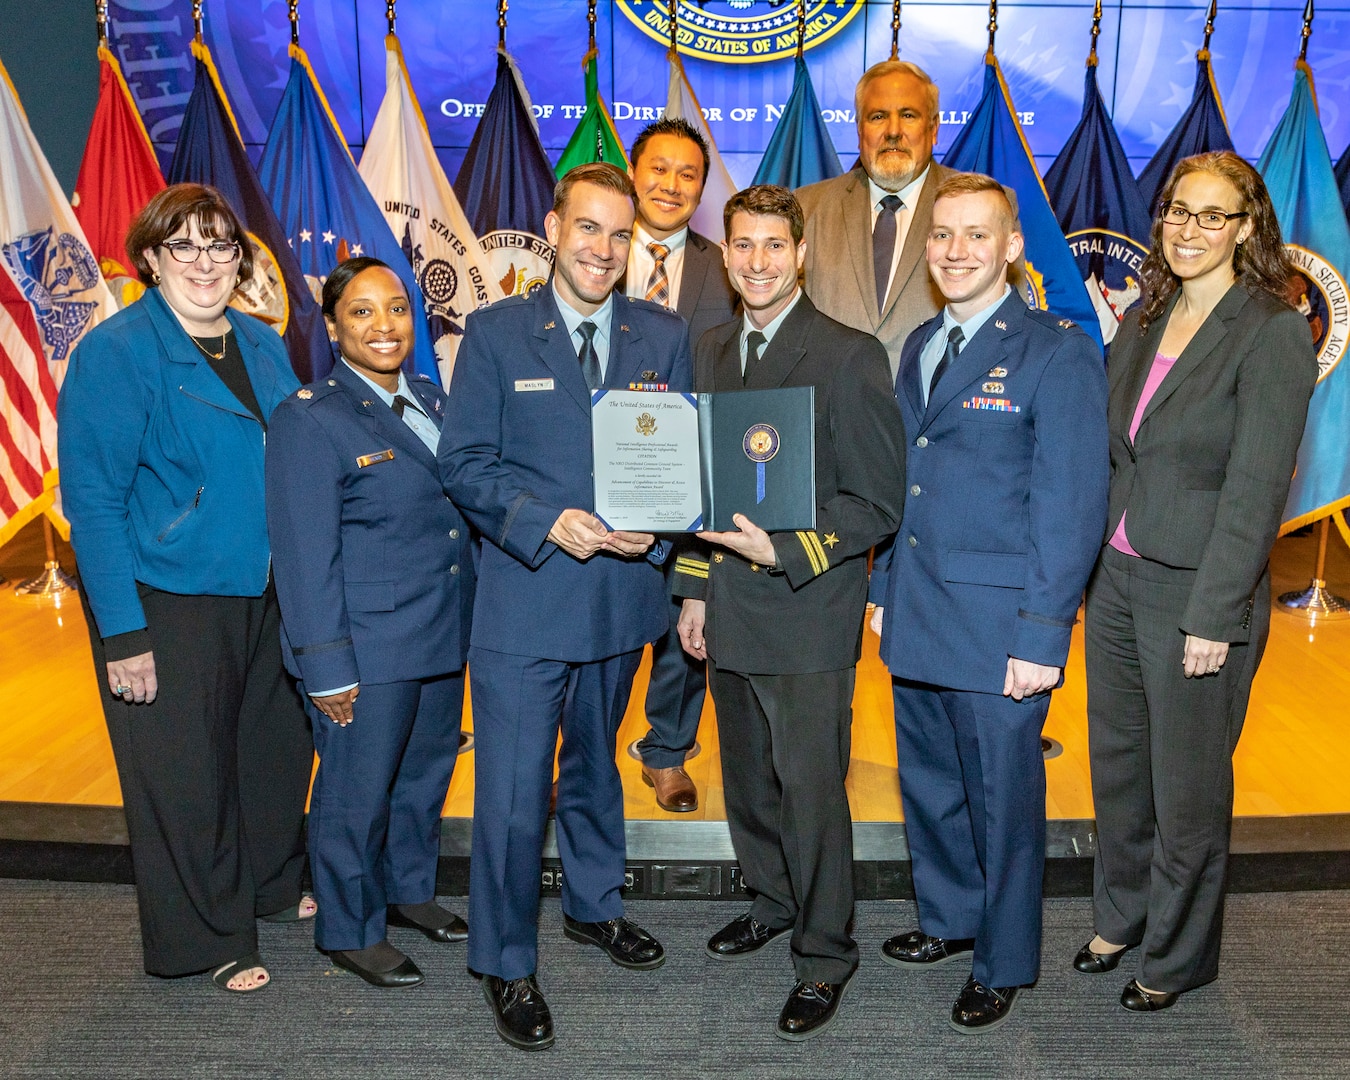 NRO receives IC team award for outstanding service